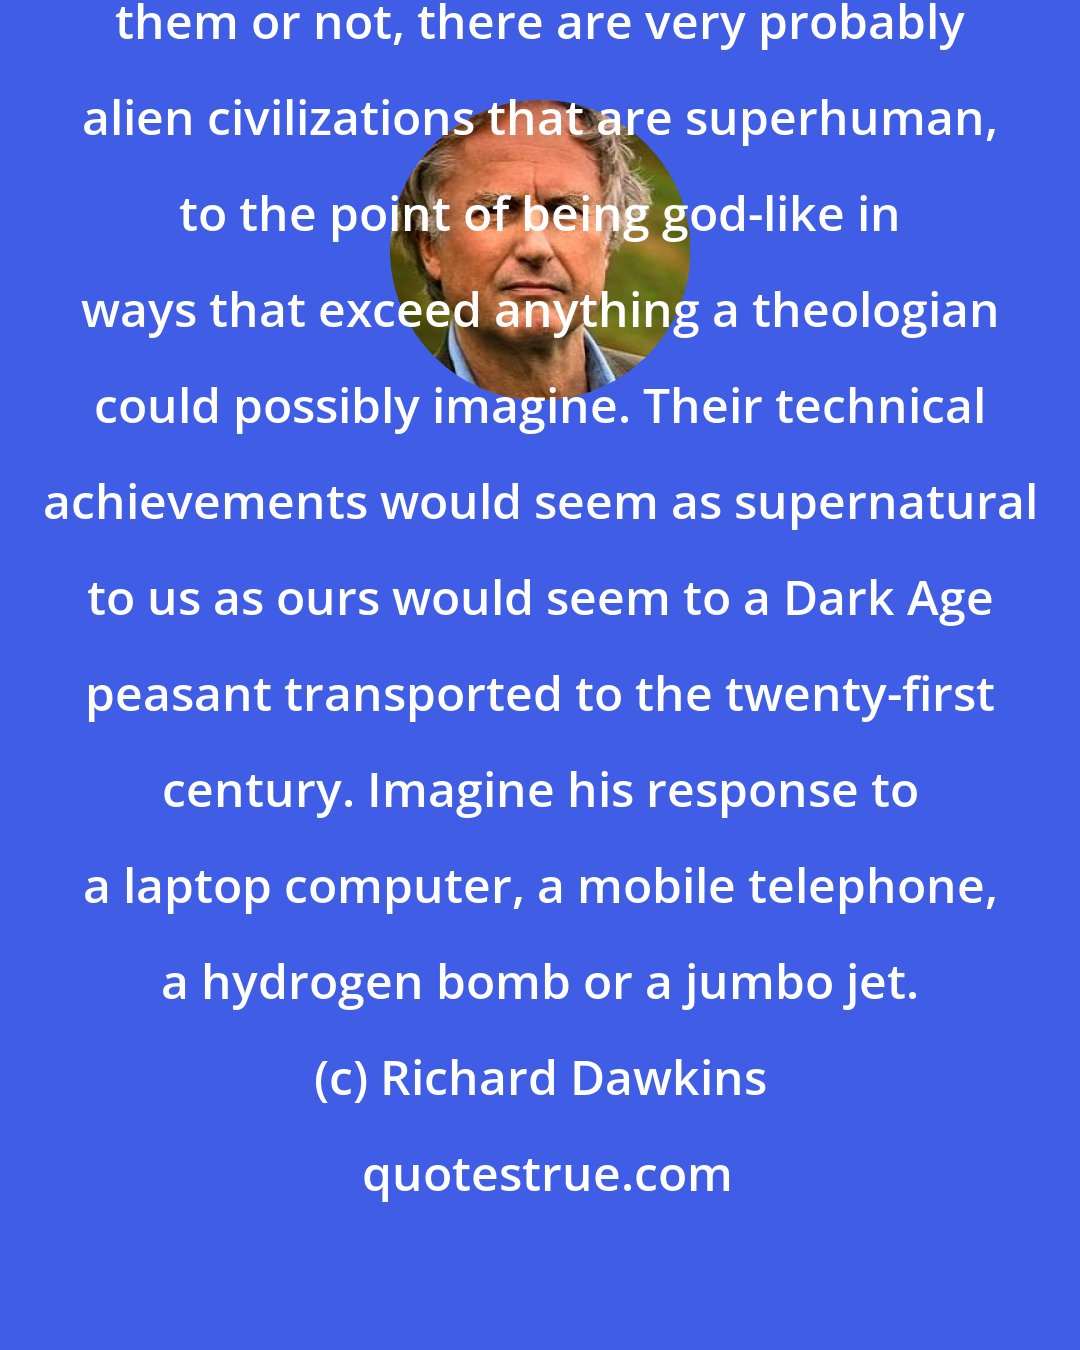 Richard Dawkins: Whether we ever get to know about them or not, there are very probably alien civilizations that are superhuman, to the point of being god-like in ways that exceed anything a theologian could possibly imagine. Their technical achievements would seem as supernatural to us as ours would seem to a Dark Age peasant transported to the twenty-first century. Imagine his response to a laptop computer, a mobile telephone, a hydrogen bomb or a jumbo jet.